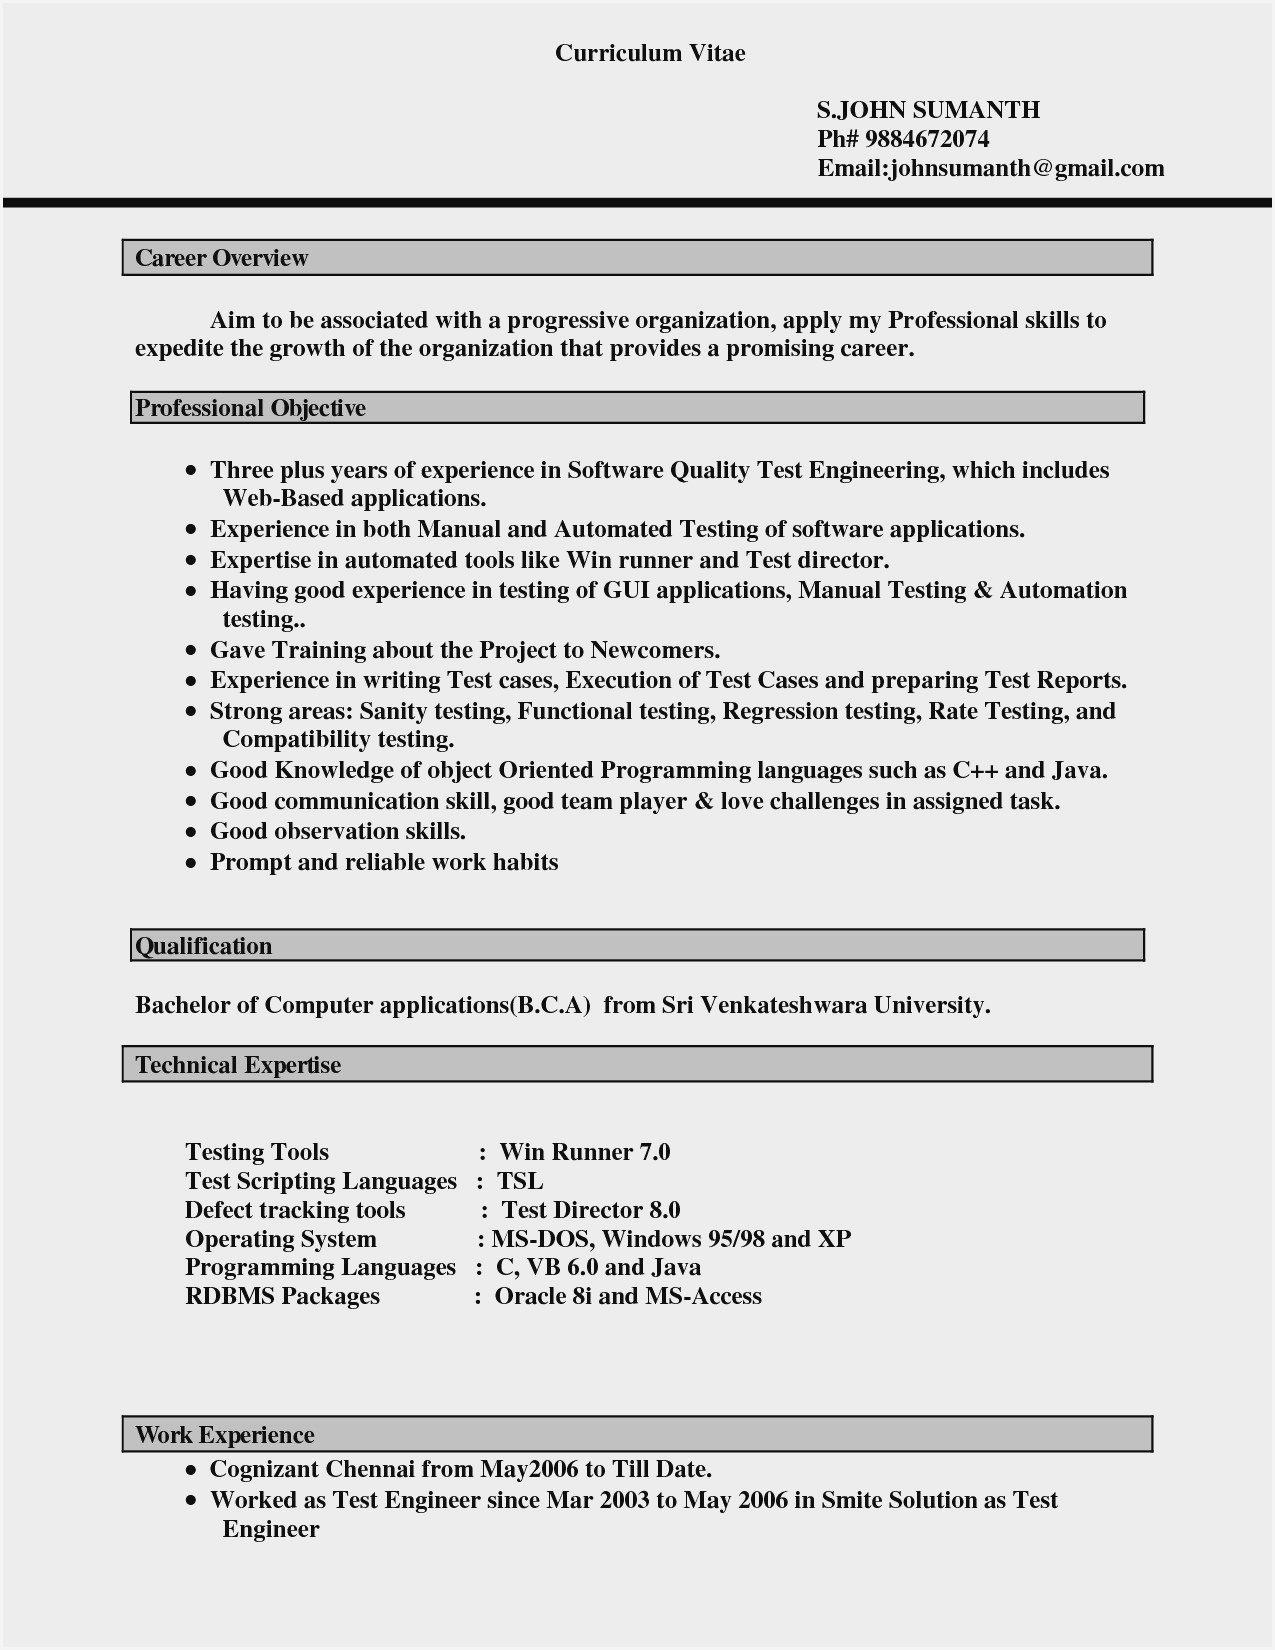 resume templates word 2003 free downloads